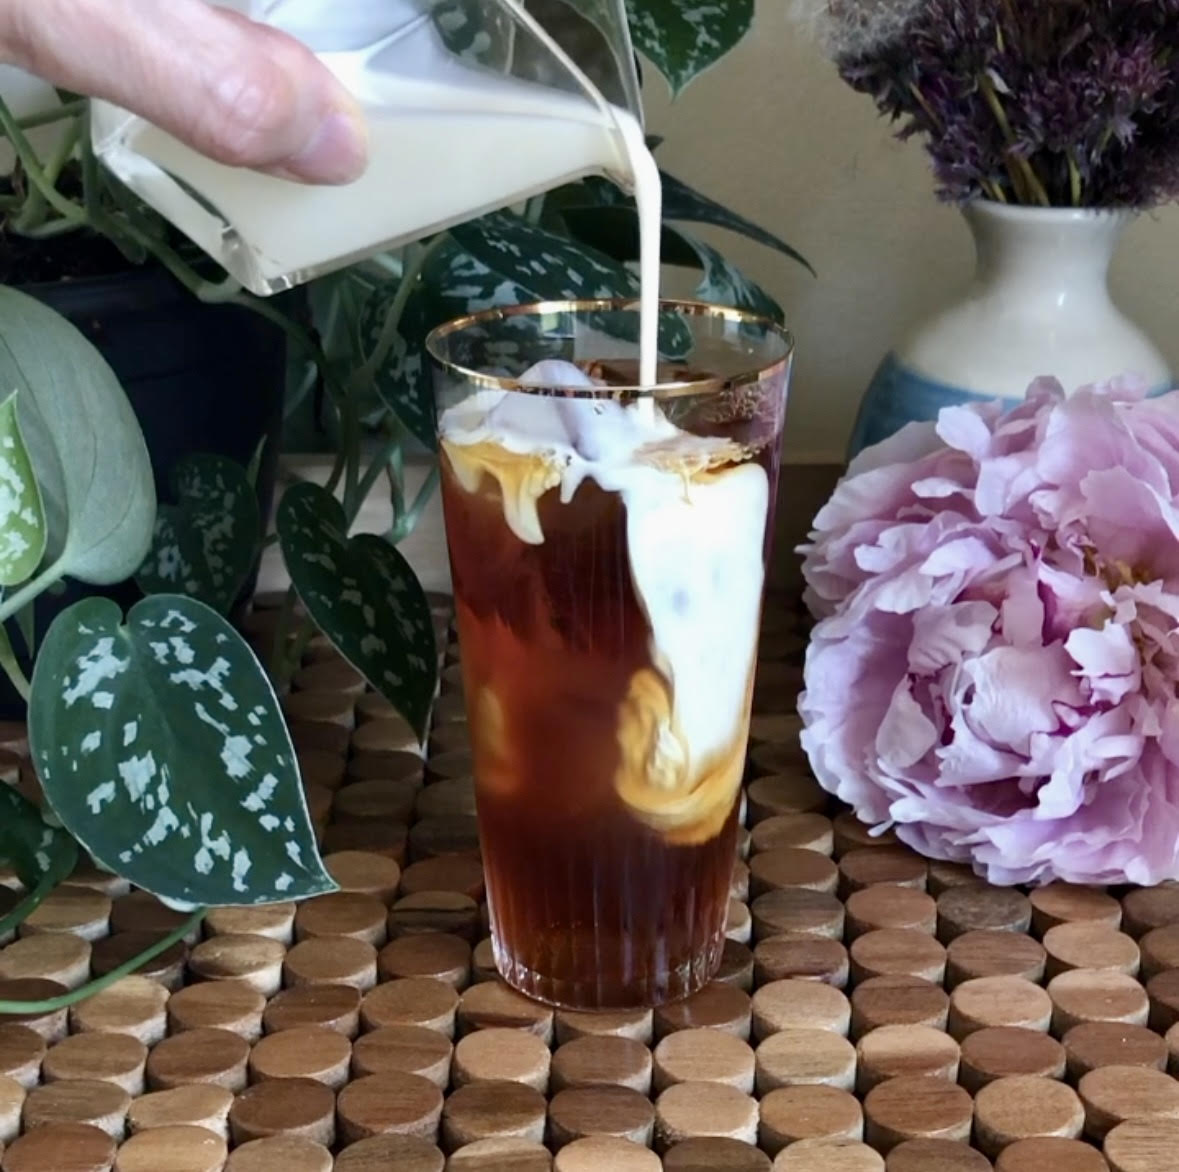 Pouring cream into a glass of dark amber iced tea (black). Nearby is a pothos plant and a pink peony.